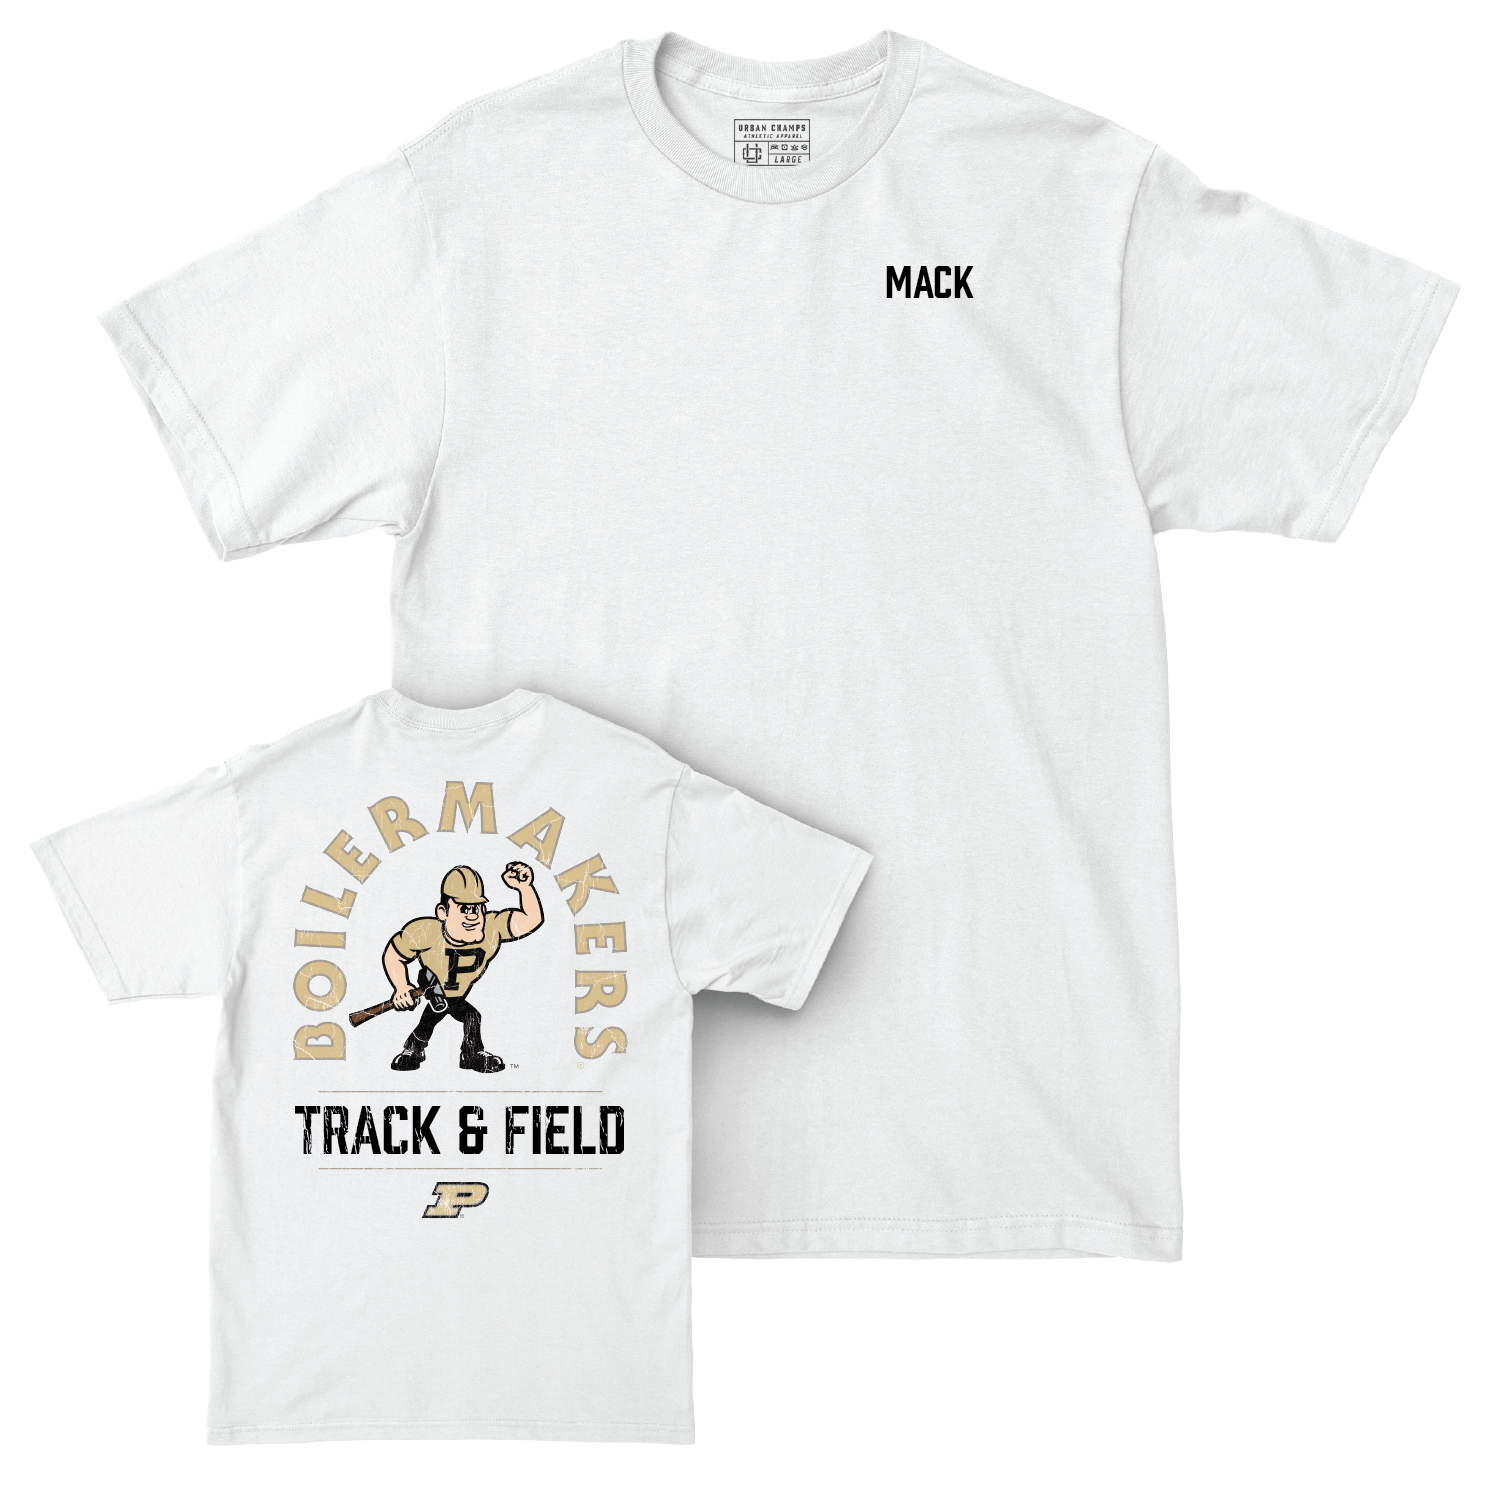 Track & Field White Mascot Comfort Colors Tee - Lainey Mack Youth Small